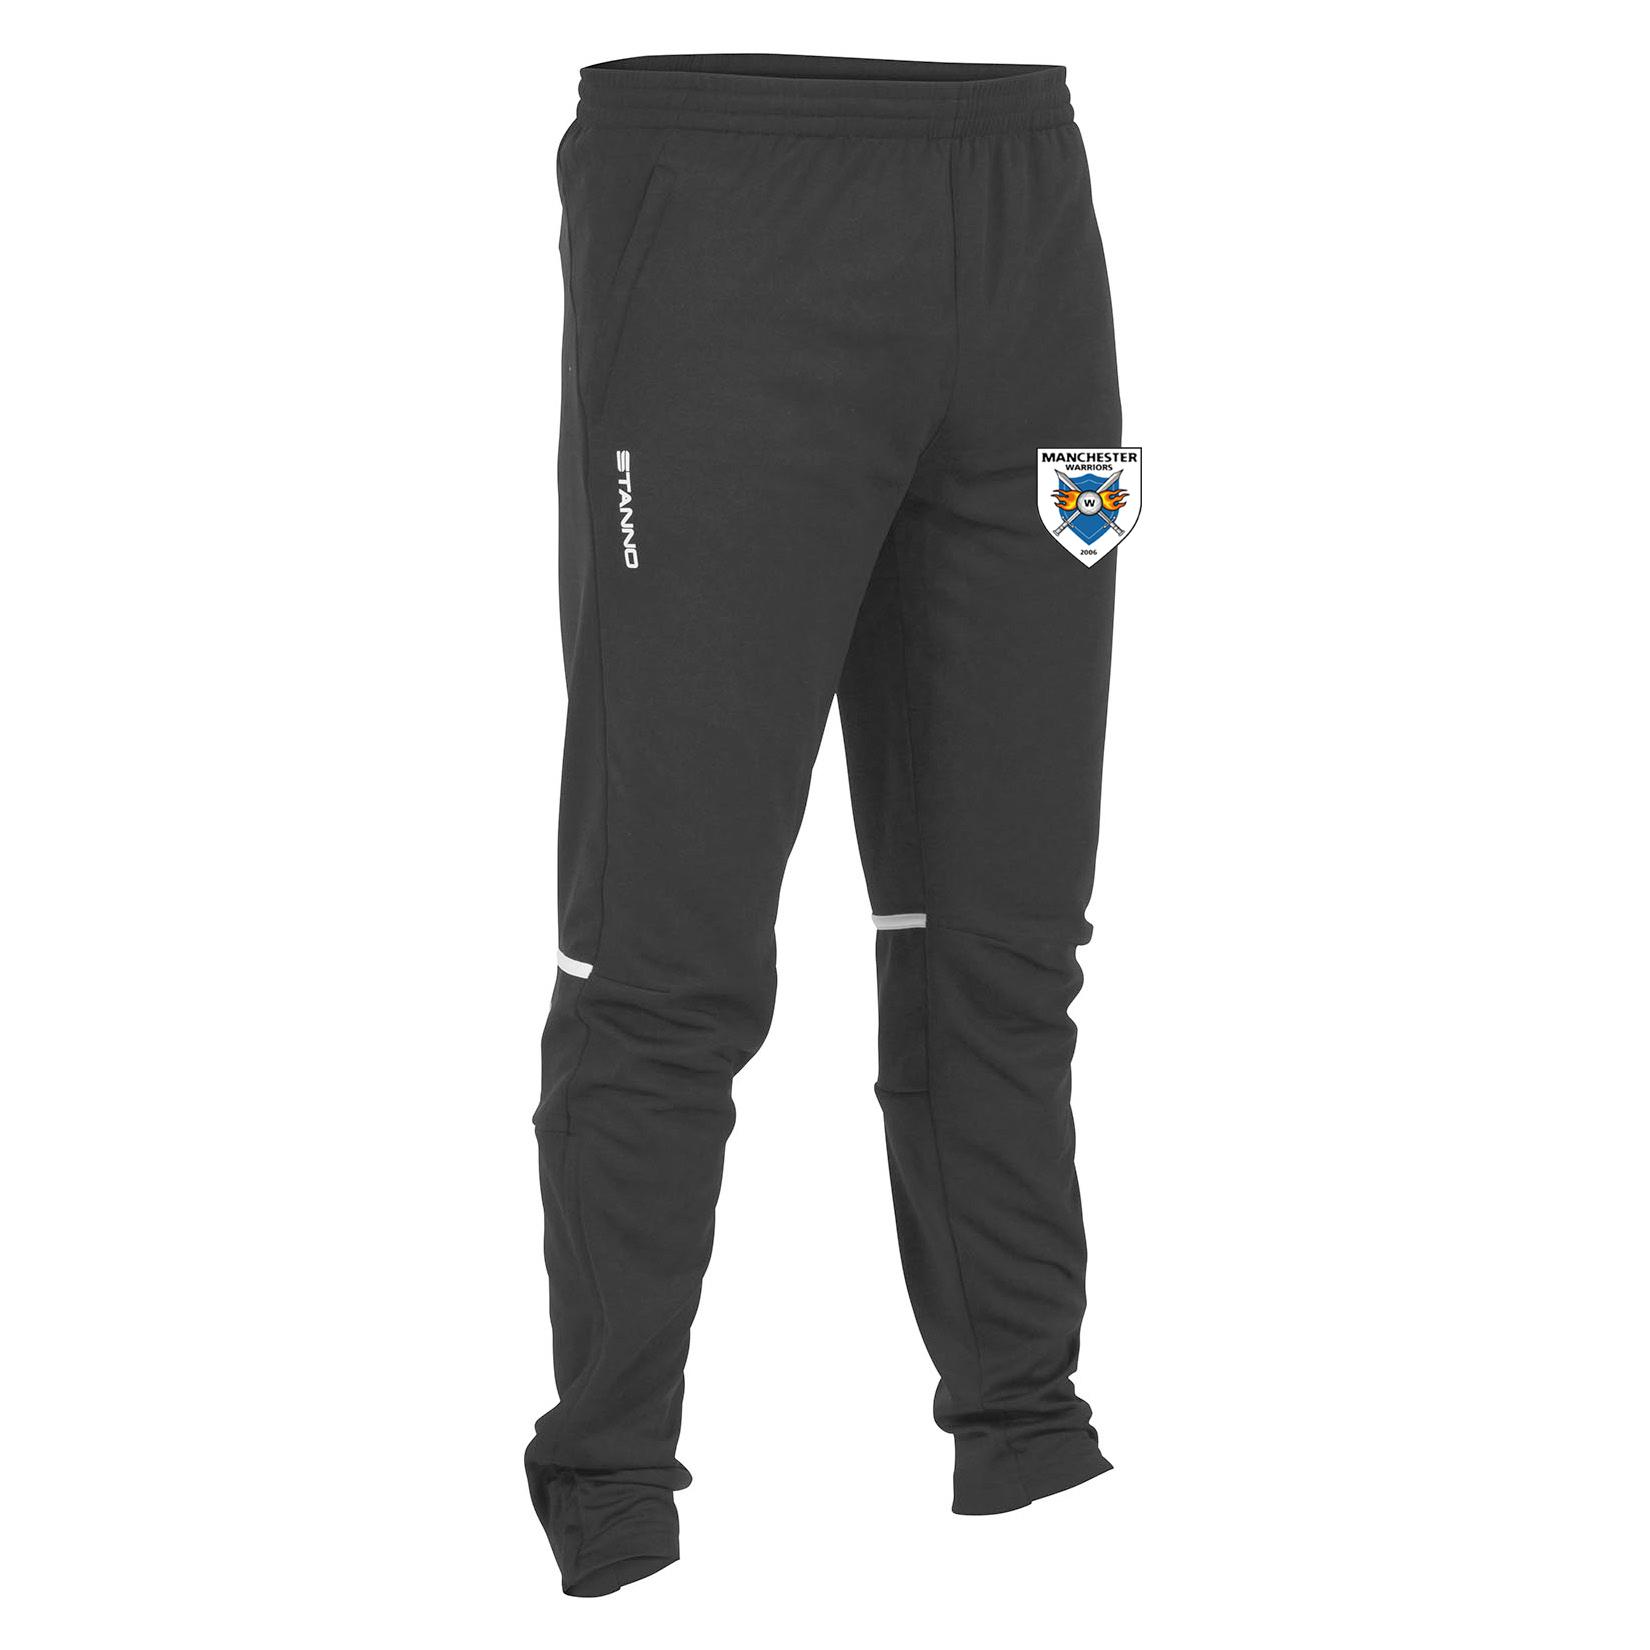 Stanno Forza Tech Knit Training Pants Black